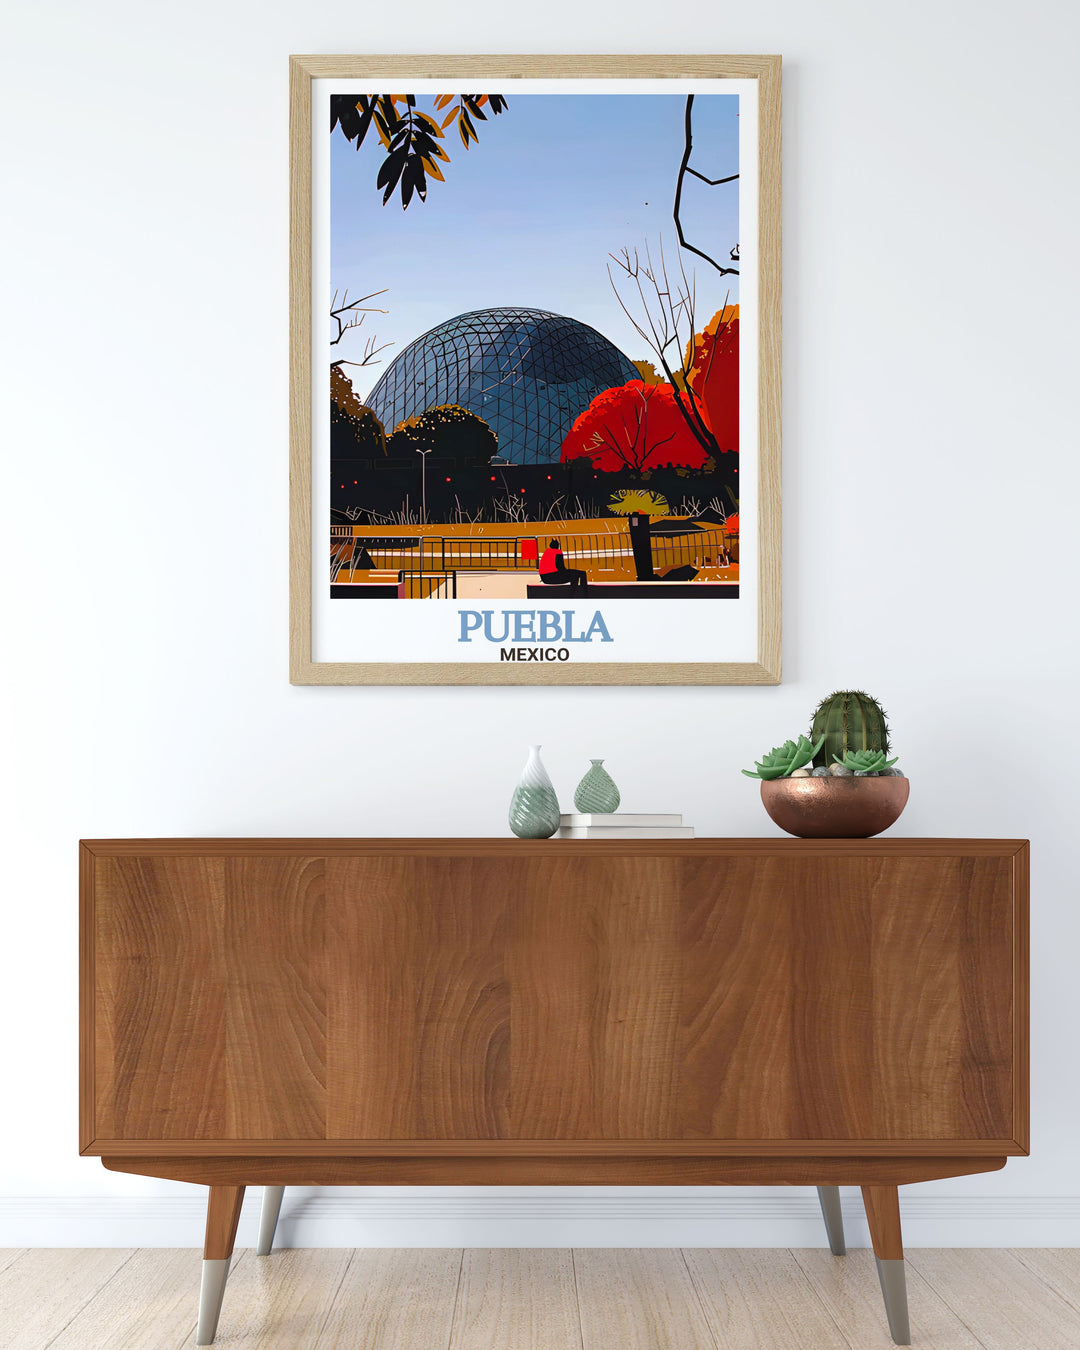 Puebla Wall Art with intricate details and colorful street scenes Parque Ecologico Revolucion Mexicana stunning prints featuring majestic views of the ecological park perfect for enhancing any living room decor unique travel poster prints that bring Mexicos beauty into your space